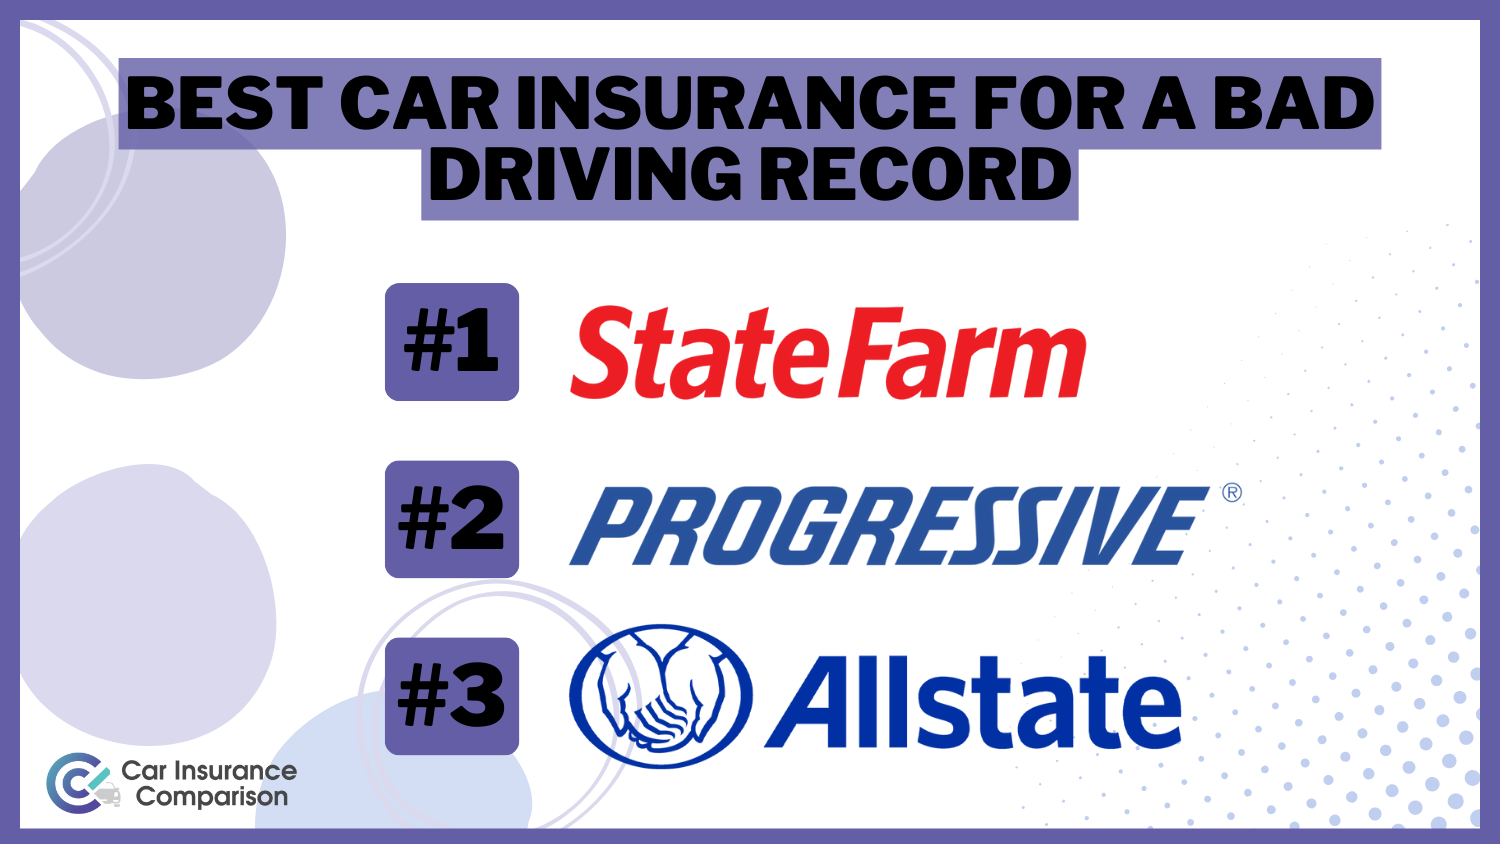 State Farm, Progressive, and Allstate: Best Car Insurance for a Bad Driving Record